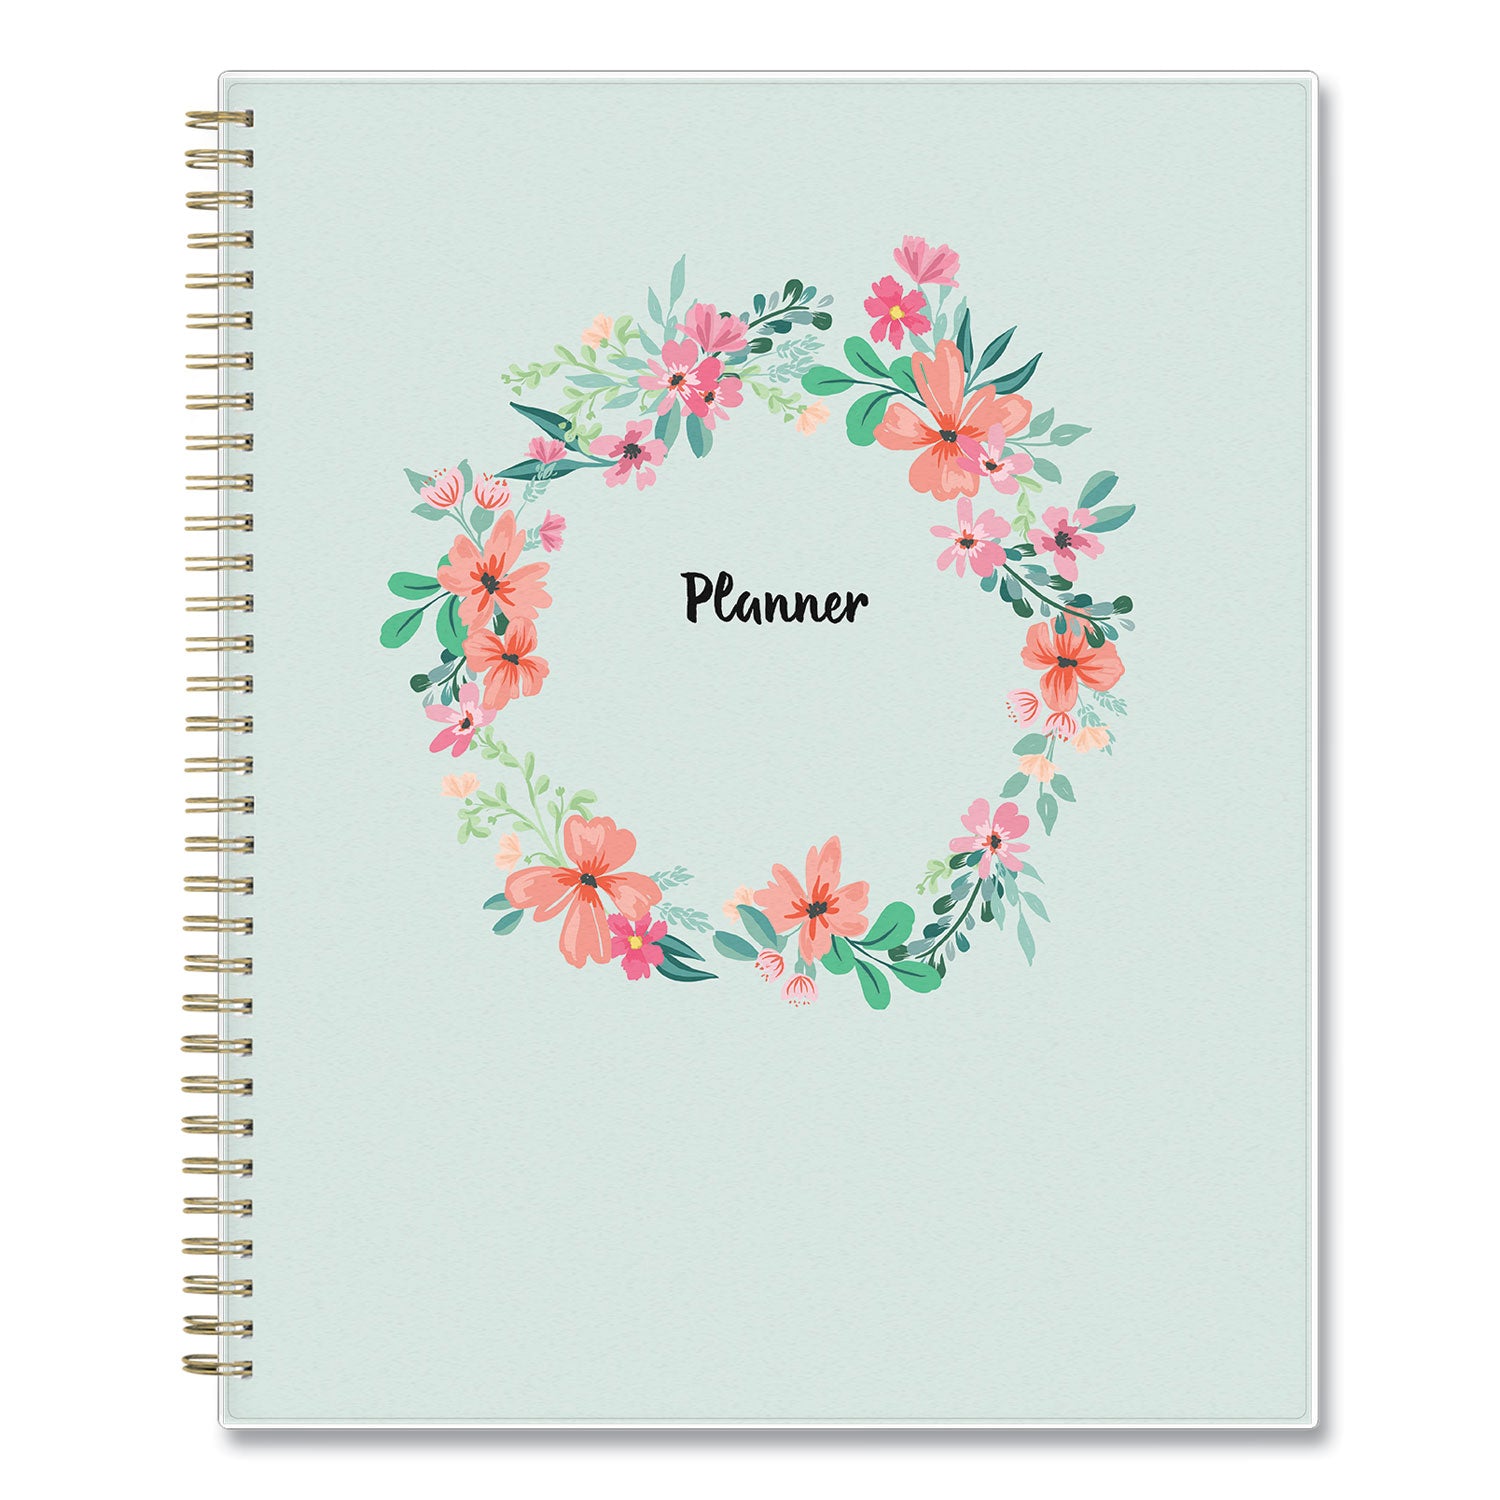 laurel-academic-year-weekly-monthly-planner-floral-artwork-11-x-85-green-pink-cover-12-month-july-june-2021-2022_bls131947 - 4